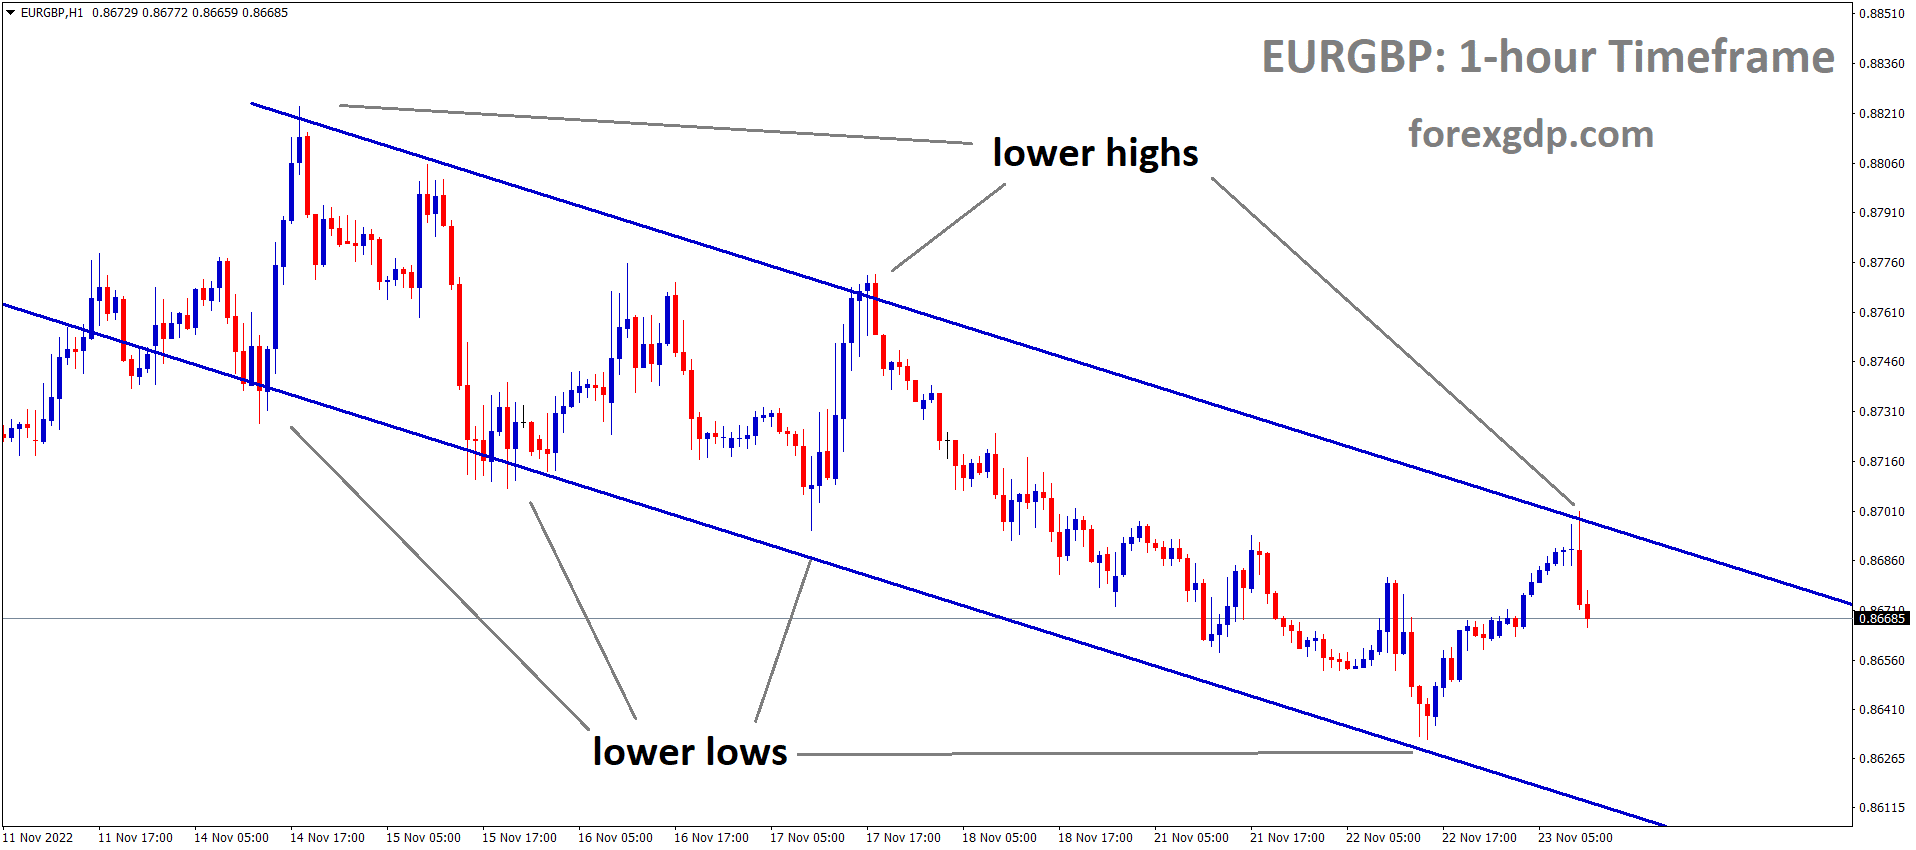 EURGBP is moving in the Descending channel and the market has fallen from the lower high area of the channel